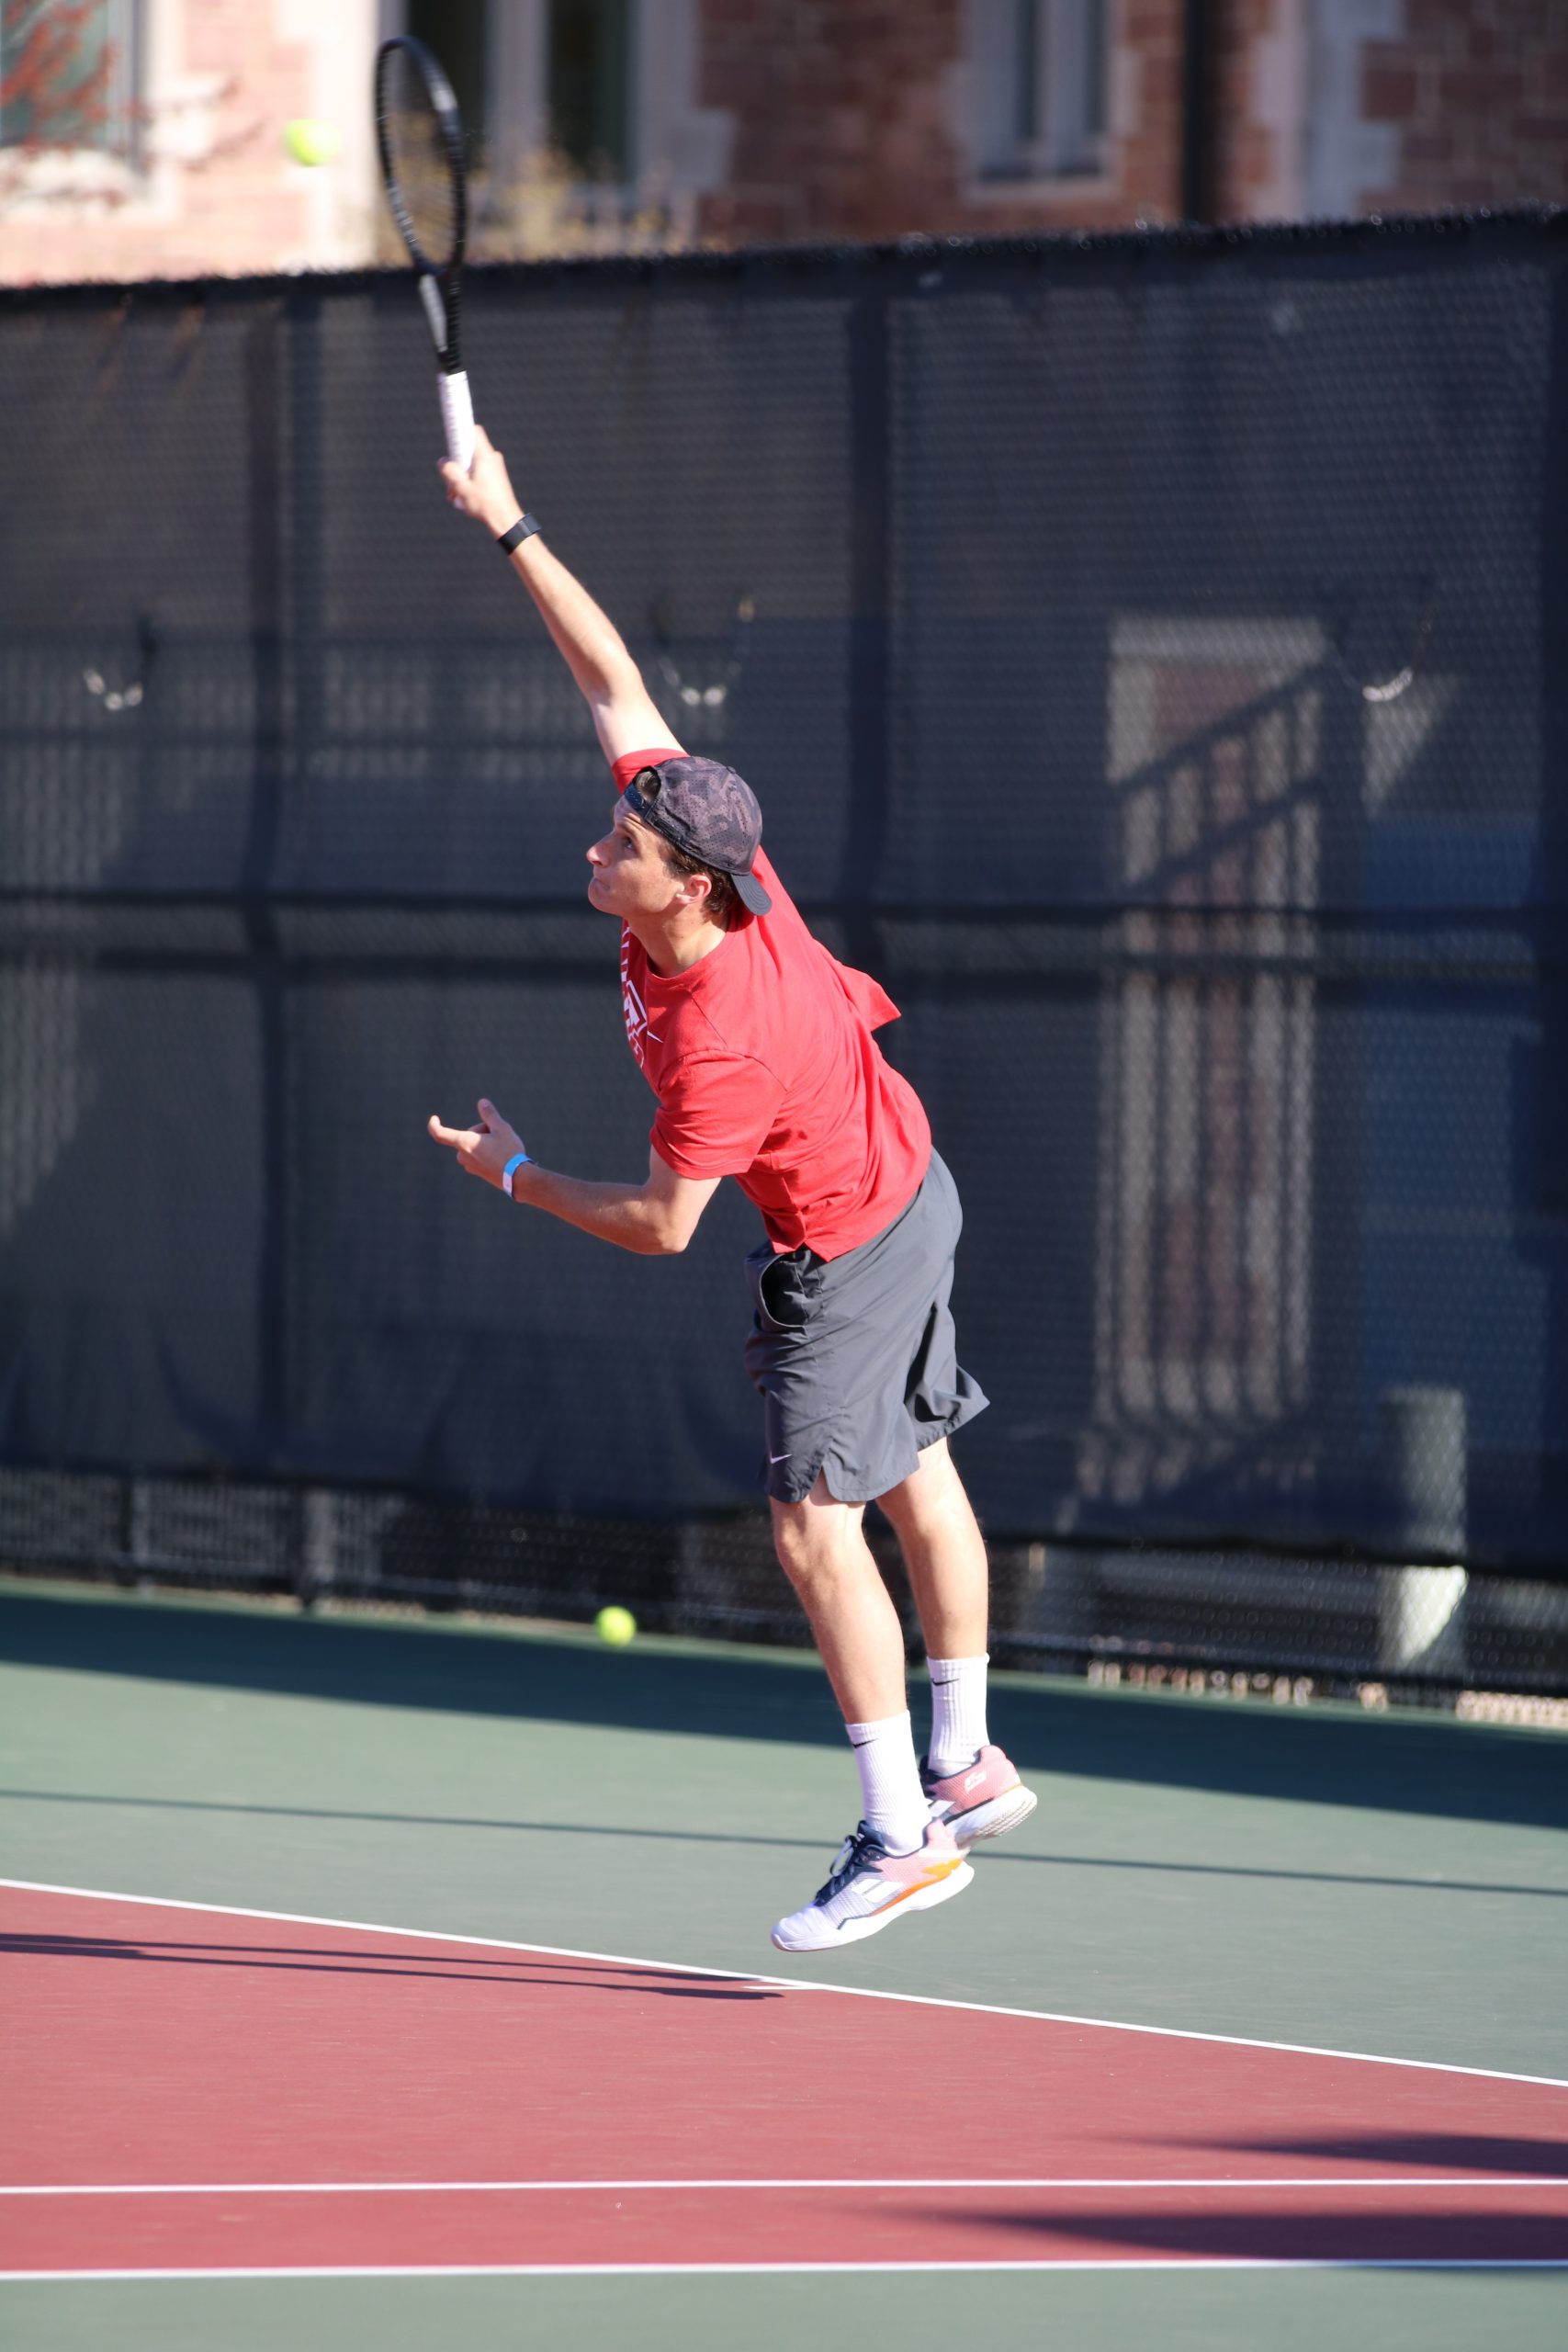 A player in a red shirt jumps with racquet held high to hit a tennis ball.